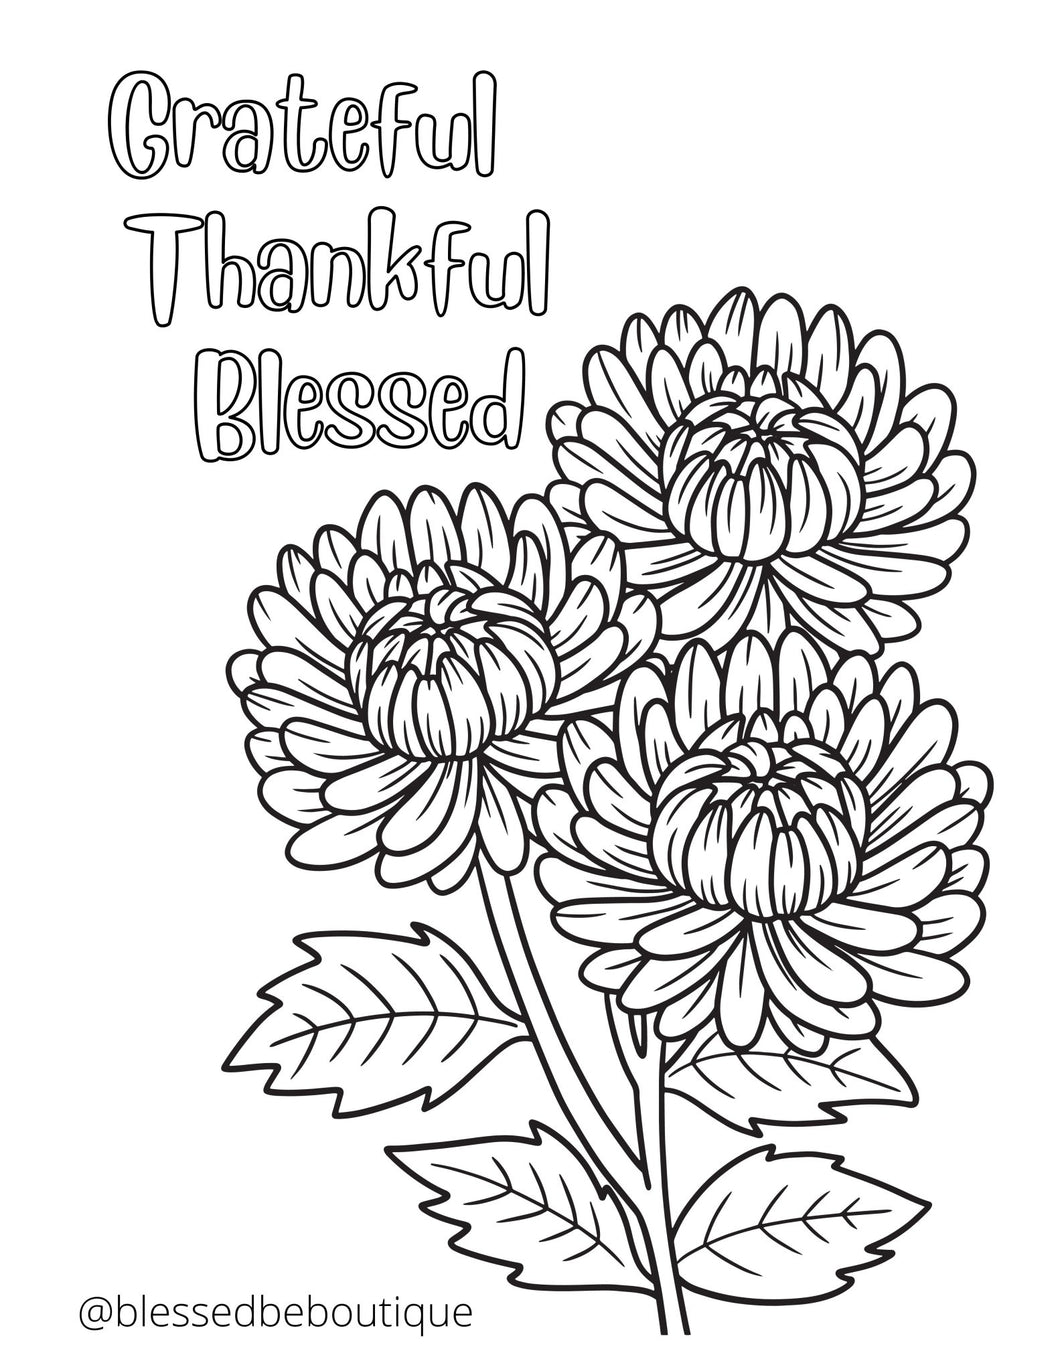 Grateful, Thankful, Blessed - Blessed Be Boutique